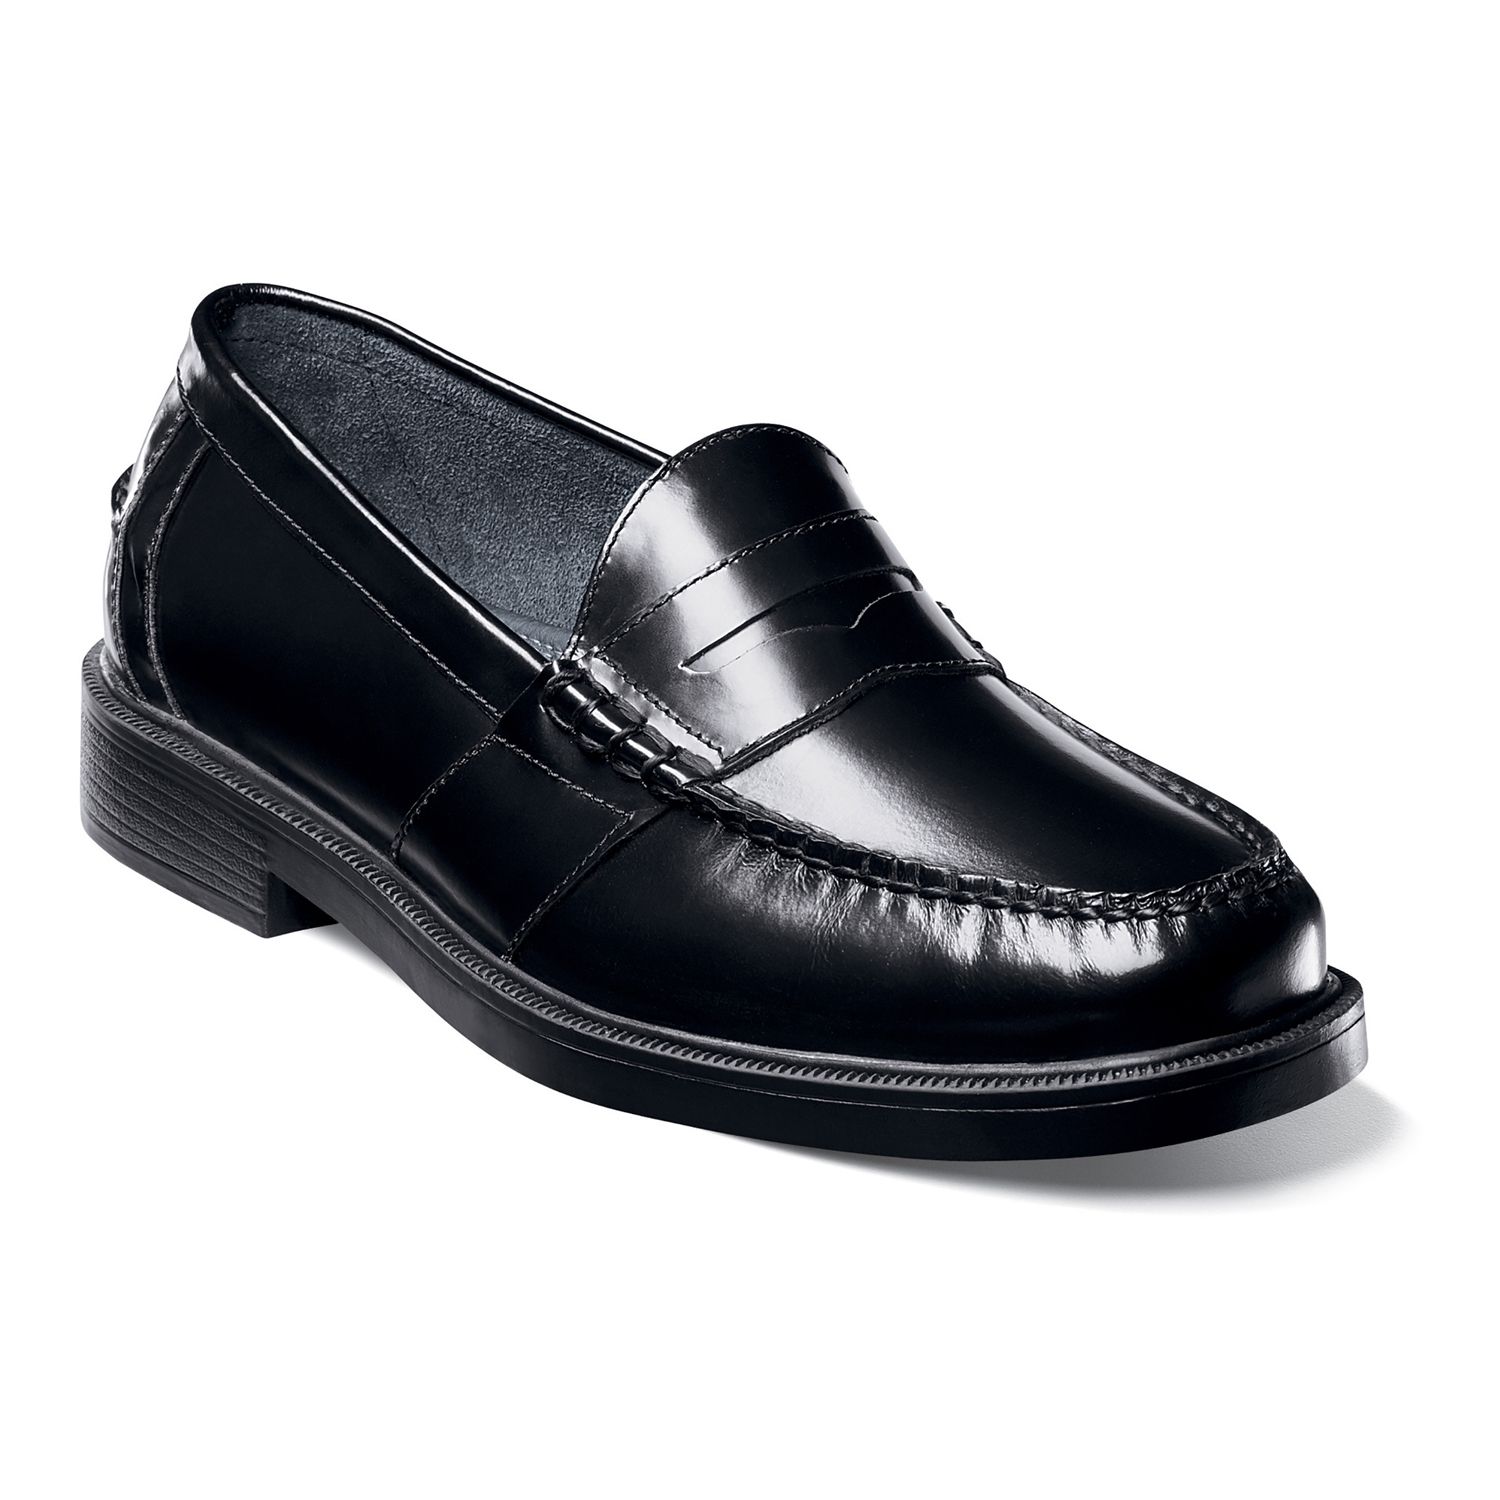 mens black and white penny loafers